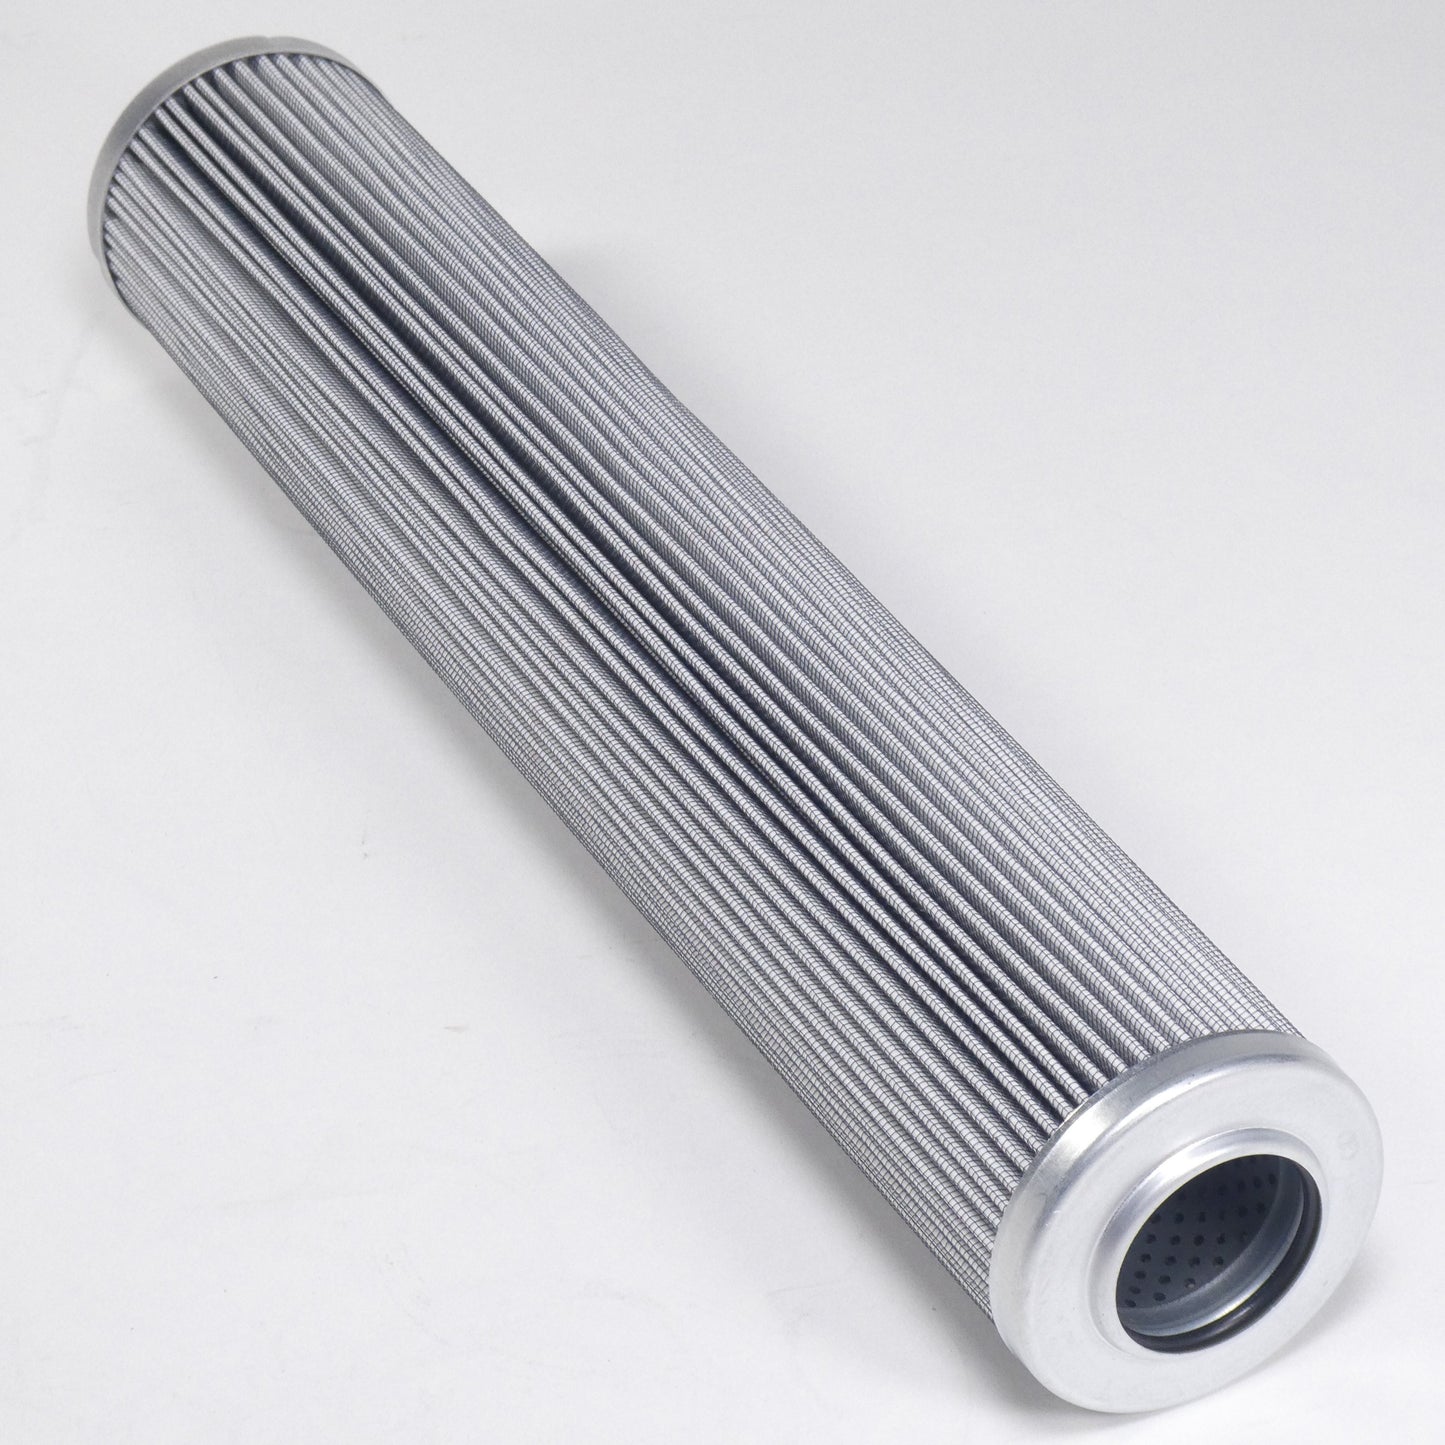 Hydrafil Replacement Filter Element for Taisei Kogyo S-H6-10M